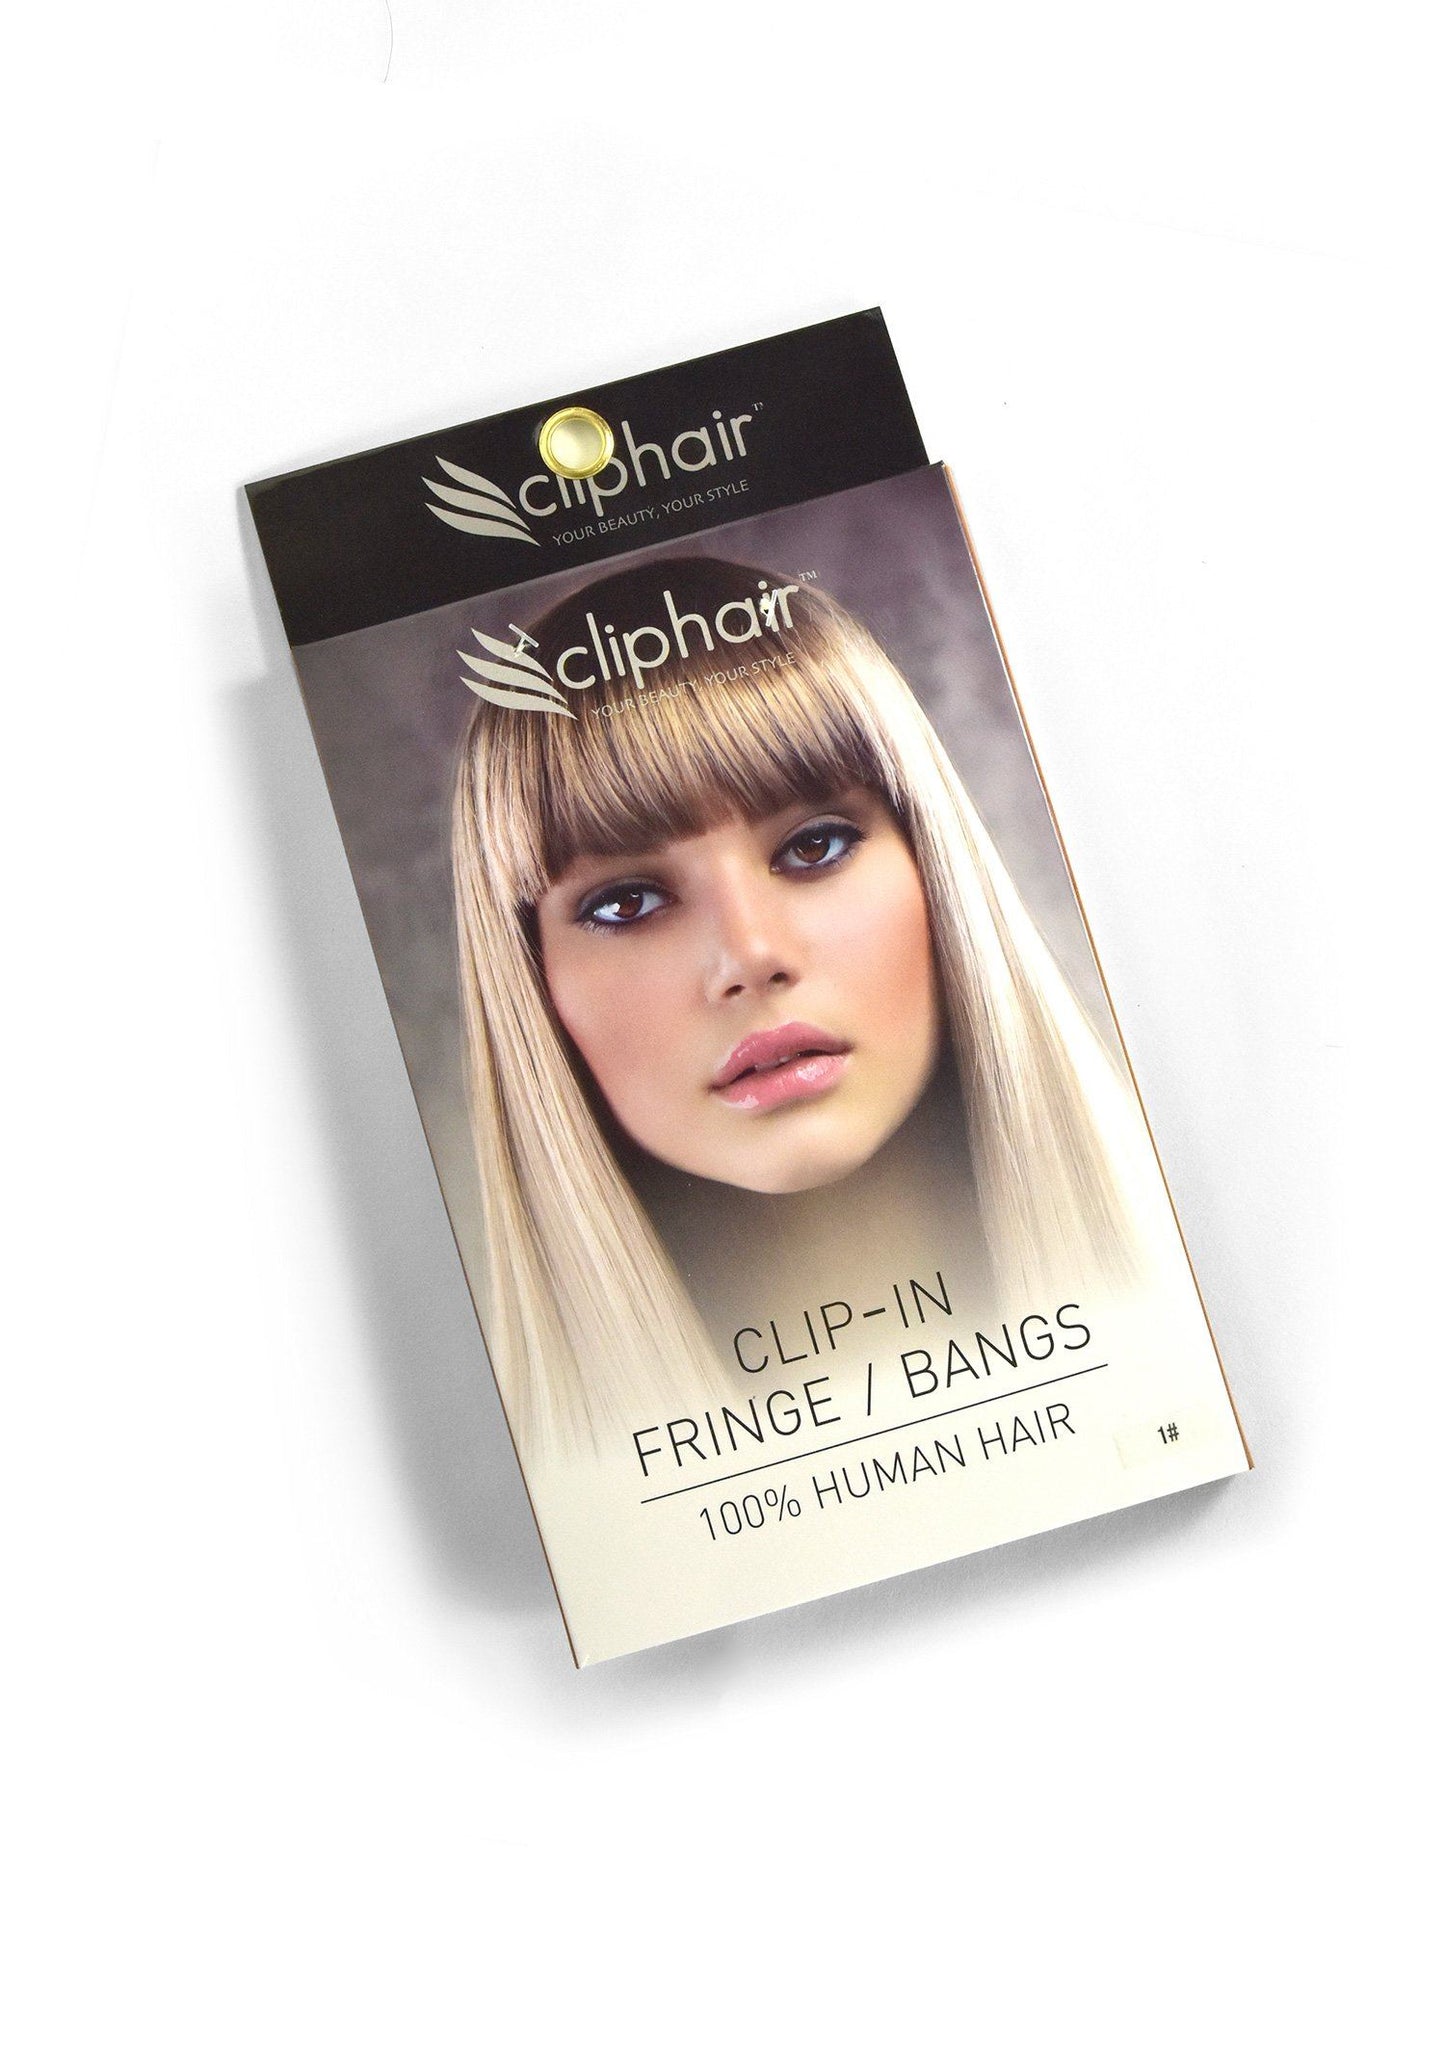 Clip in /on Remy Human Hair Fringe / Bangs - Medium Ash Brown (#8) Clip In Fringe Extensions cliphair 